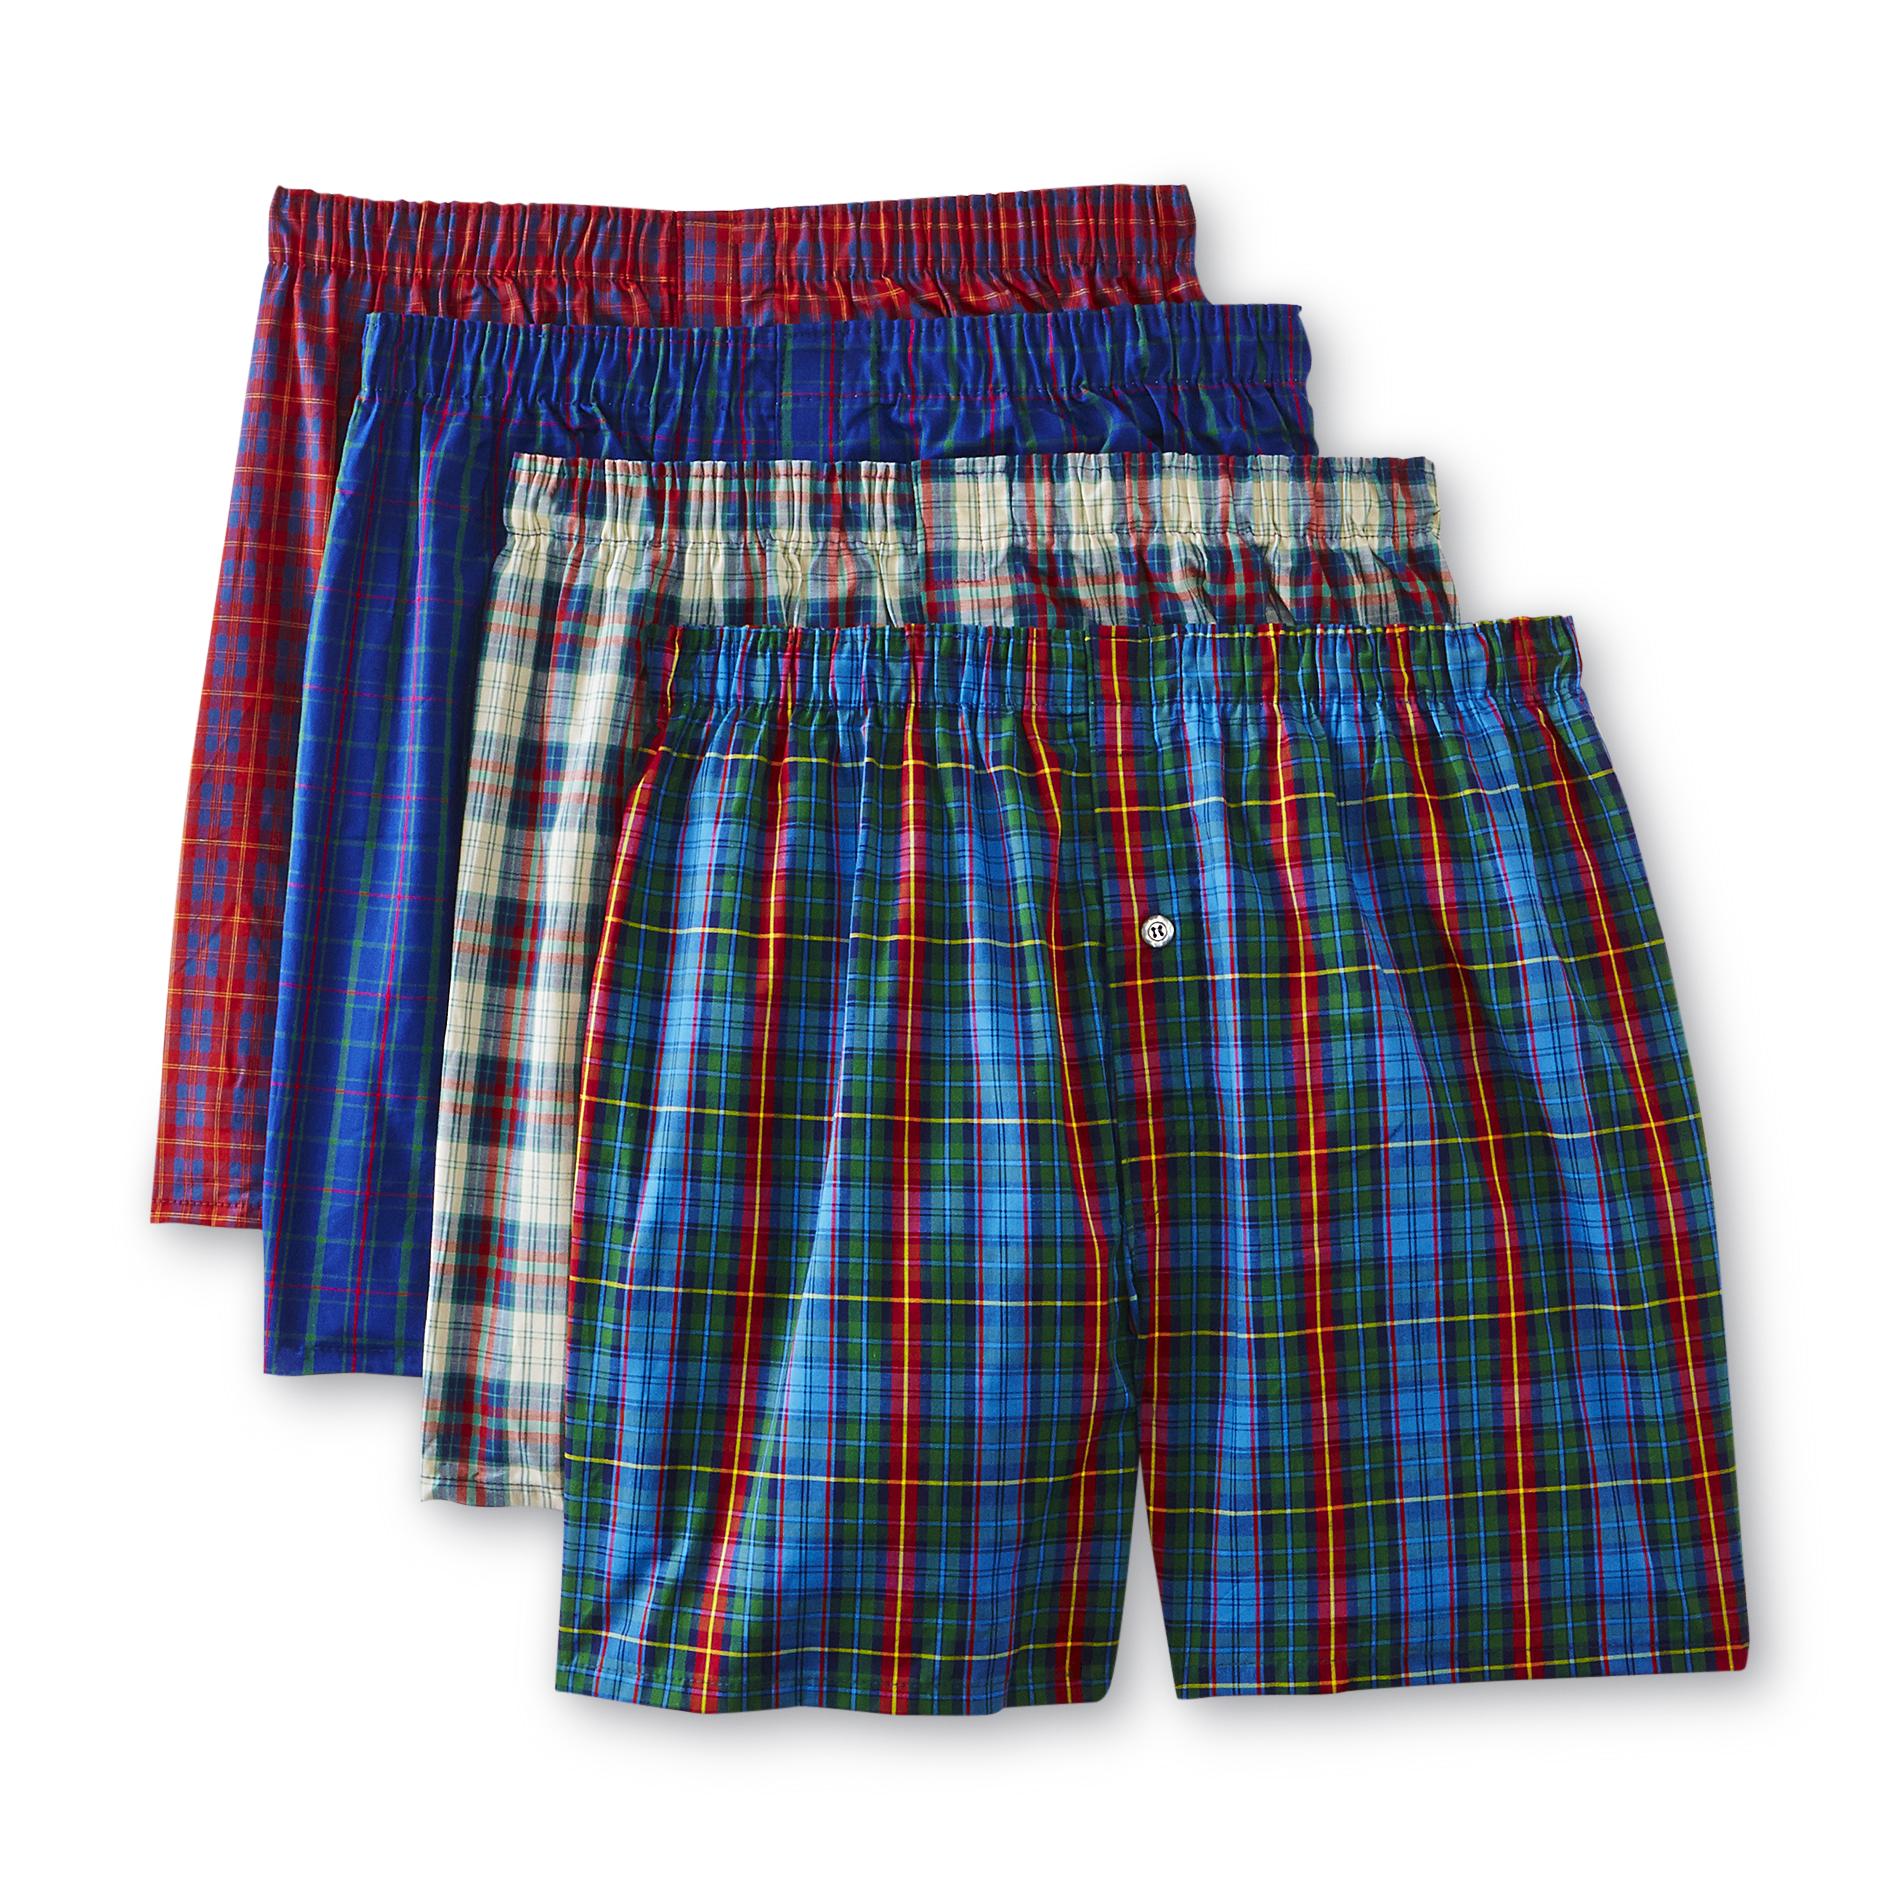 Fruit of the Loom Men's 5-Pack Boxers - Assorted Plaid Colors | Shop ...